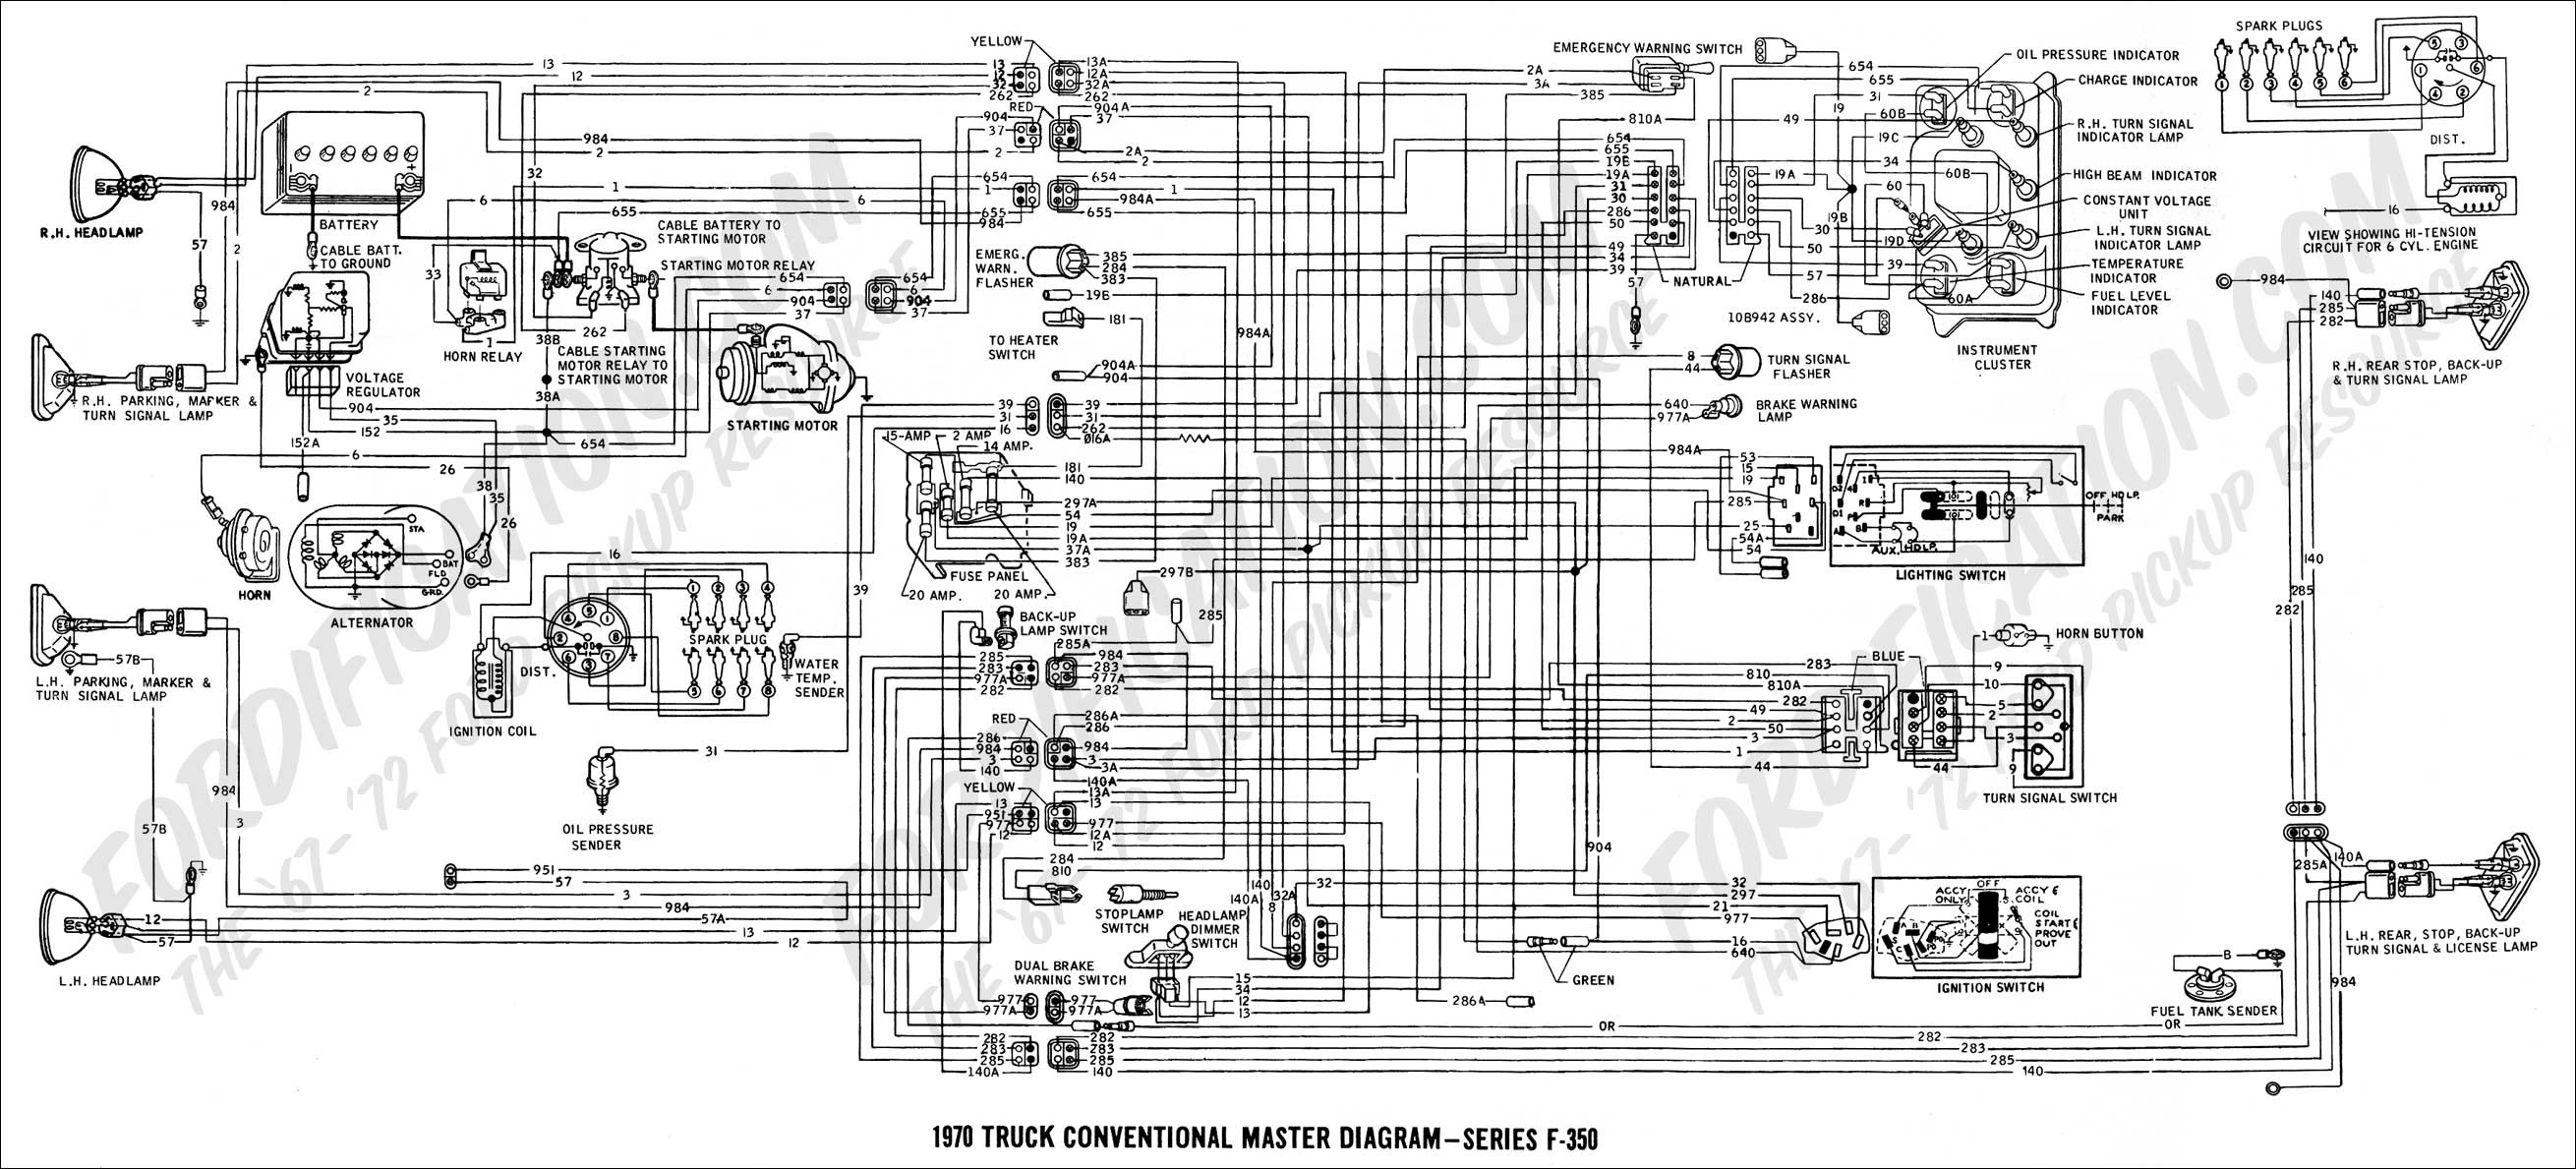 2000 ford Expedition Engine Diagram 2000 ford F 250 Wiring Diagram Also 2006 ford E250 Van Wiring